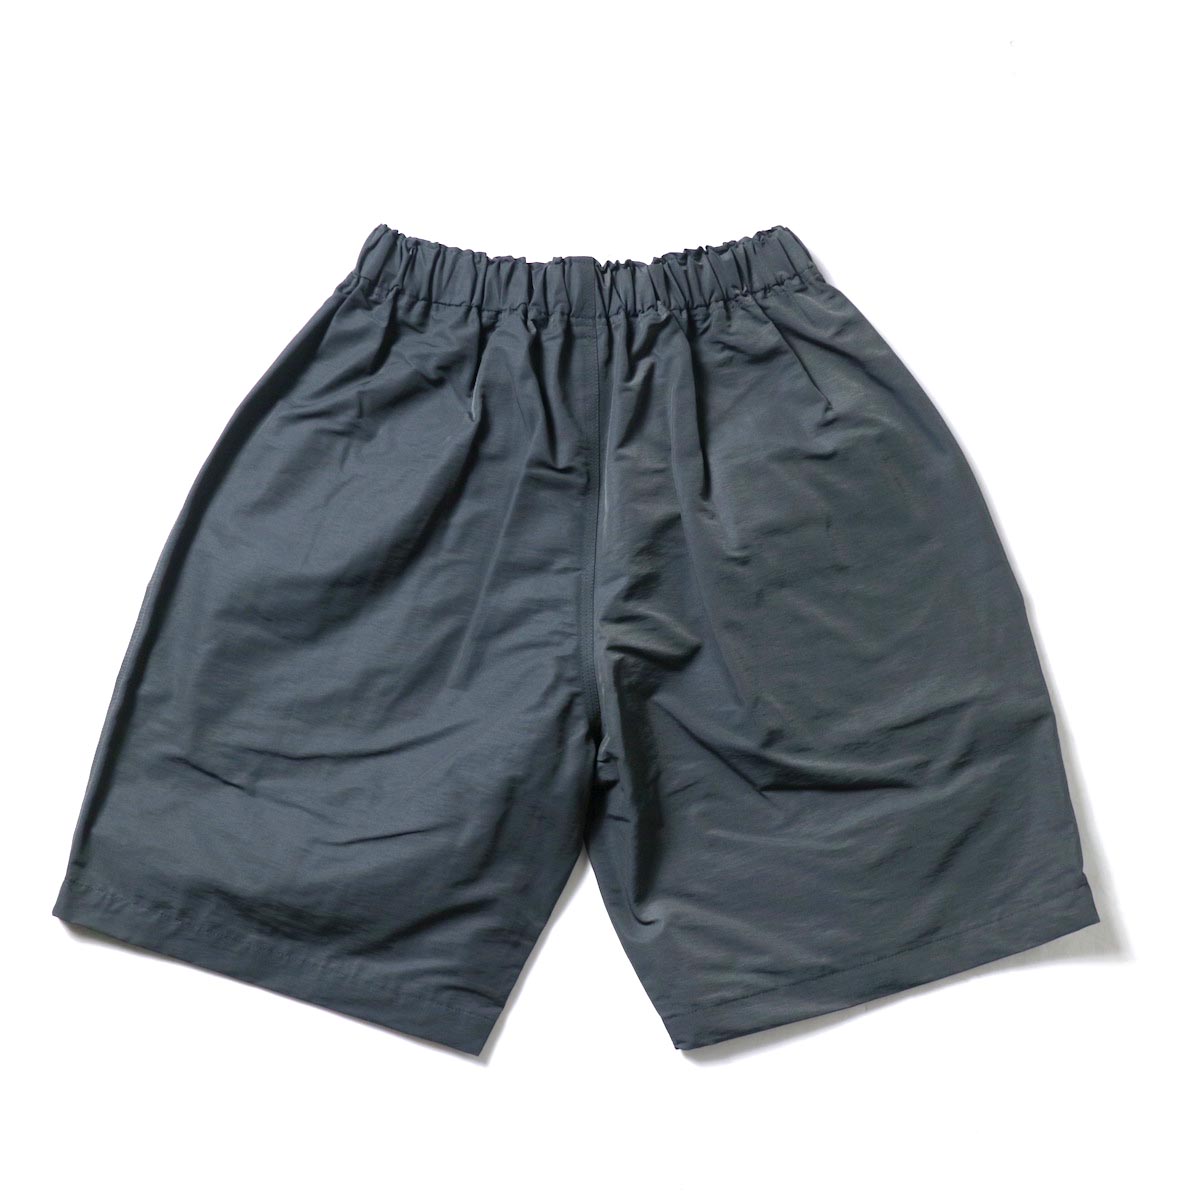 South2 West8 / BELTED C.S. SHORT - C/N GROSGRAIN (Charcoal)背面